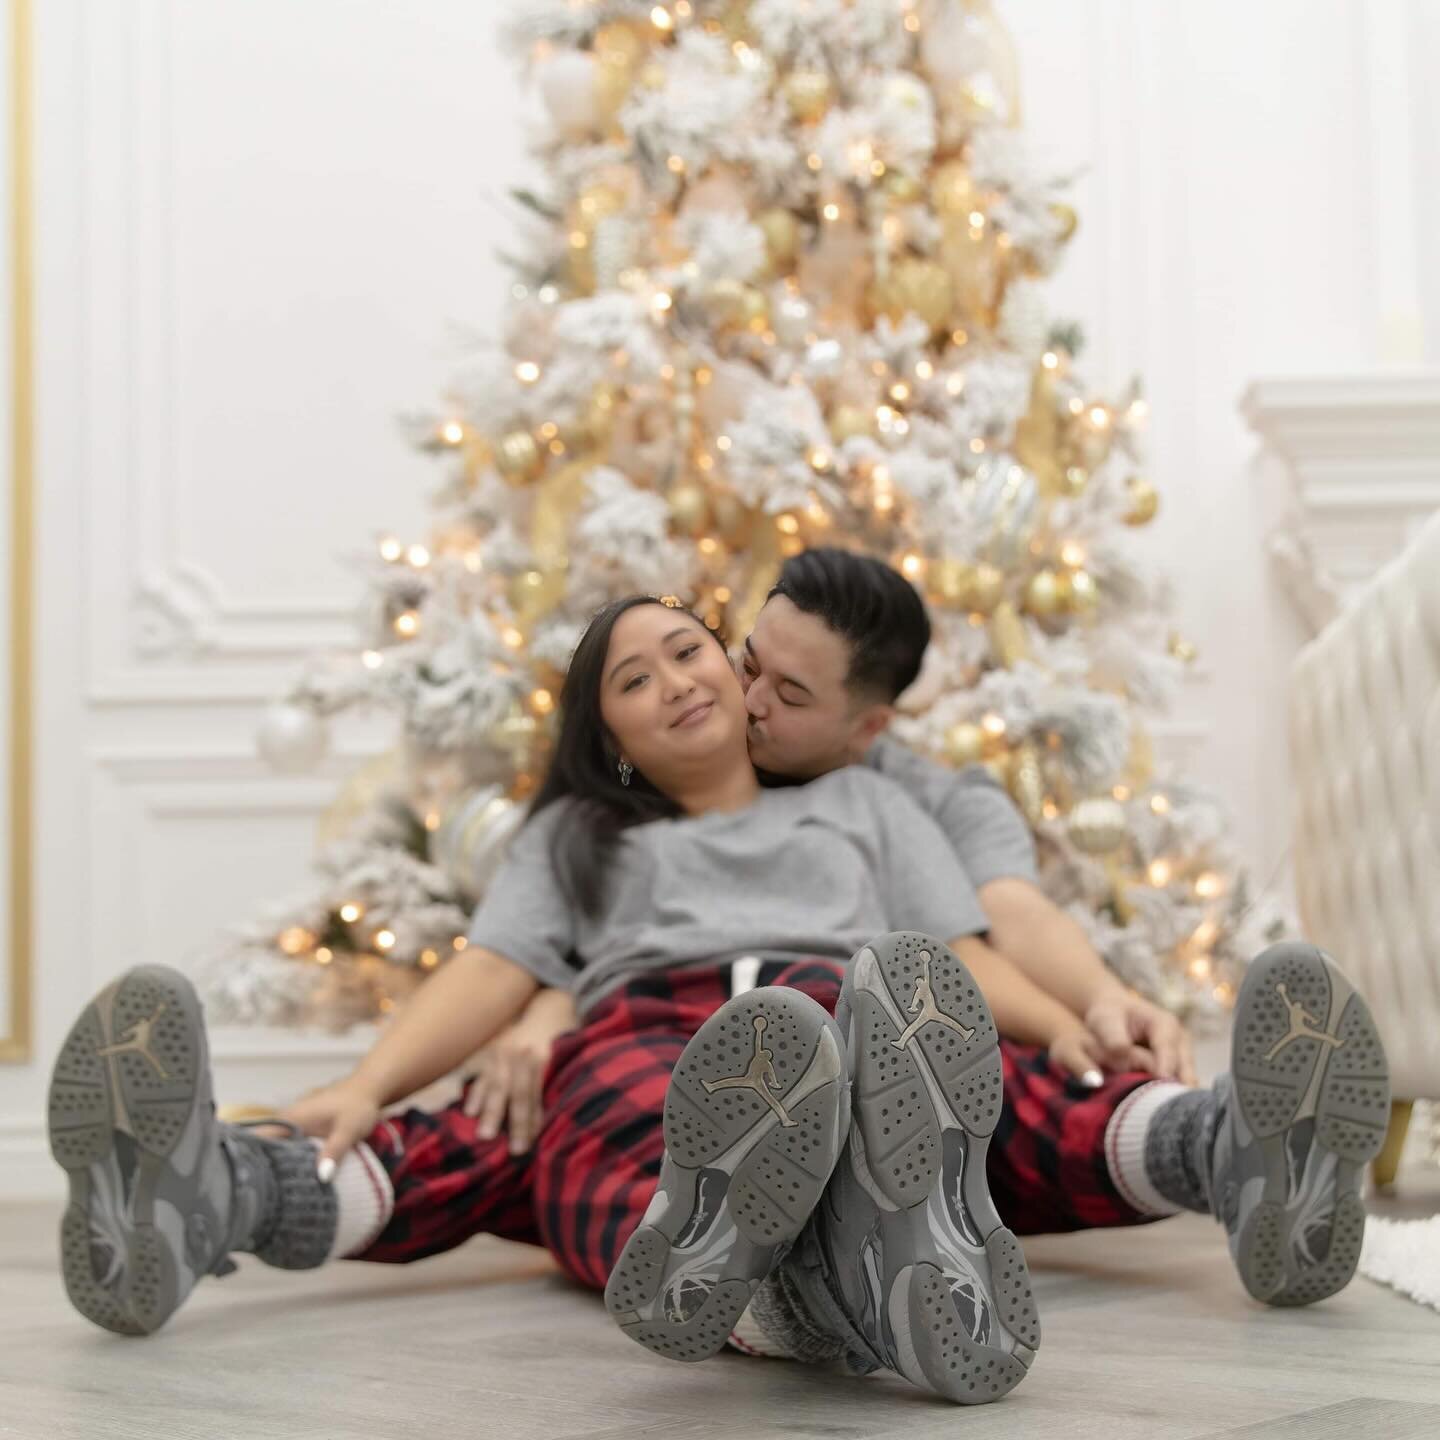 Jordan&rsquo;s and Luxury Christmas photos? Check ✔️

Shot in the Timeless Room @timelesstreestudios